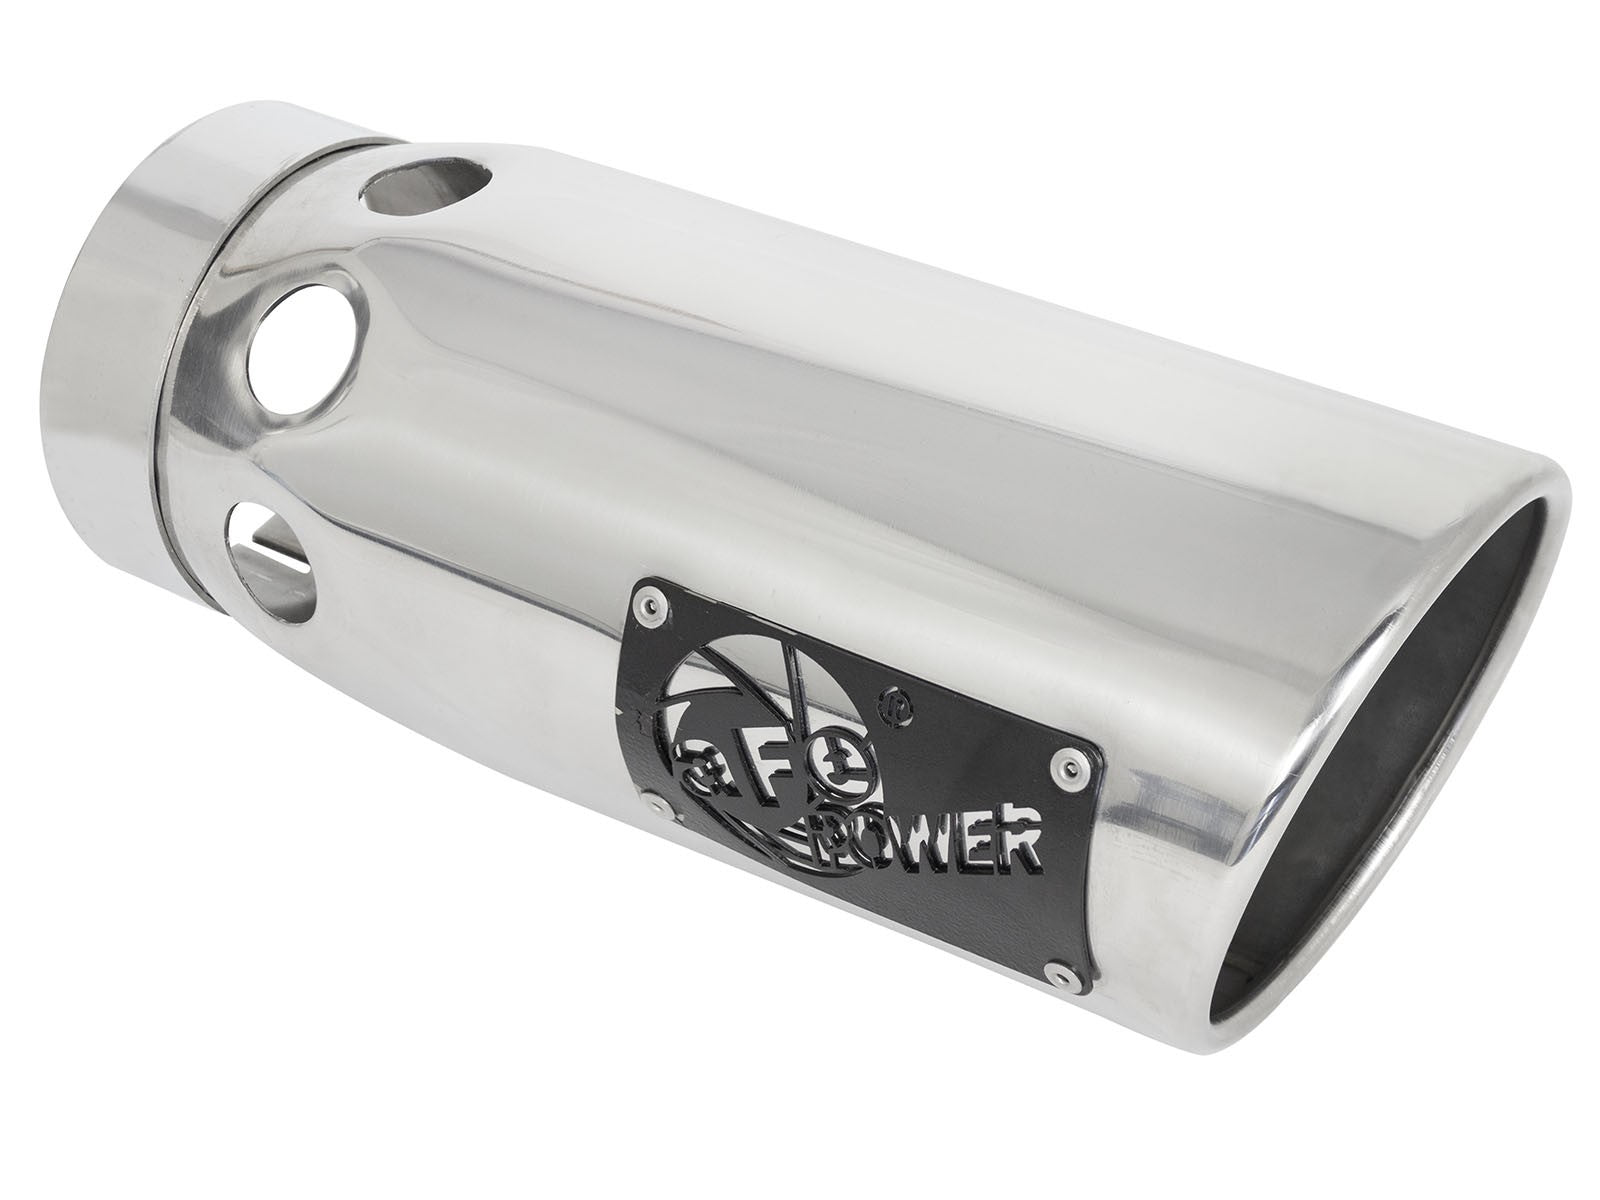 MACH Force-Xp 304 Stainless Steel Intercooled Clamp-on Exhaust Tip Polished 4 IN Inlet x 5 IN Outlet x 12 IN L